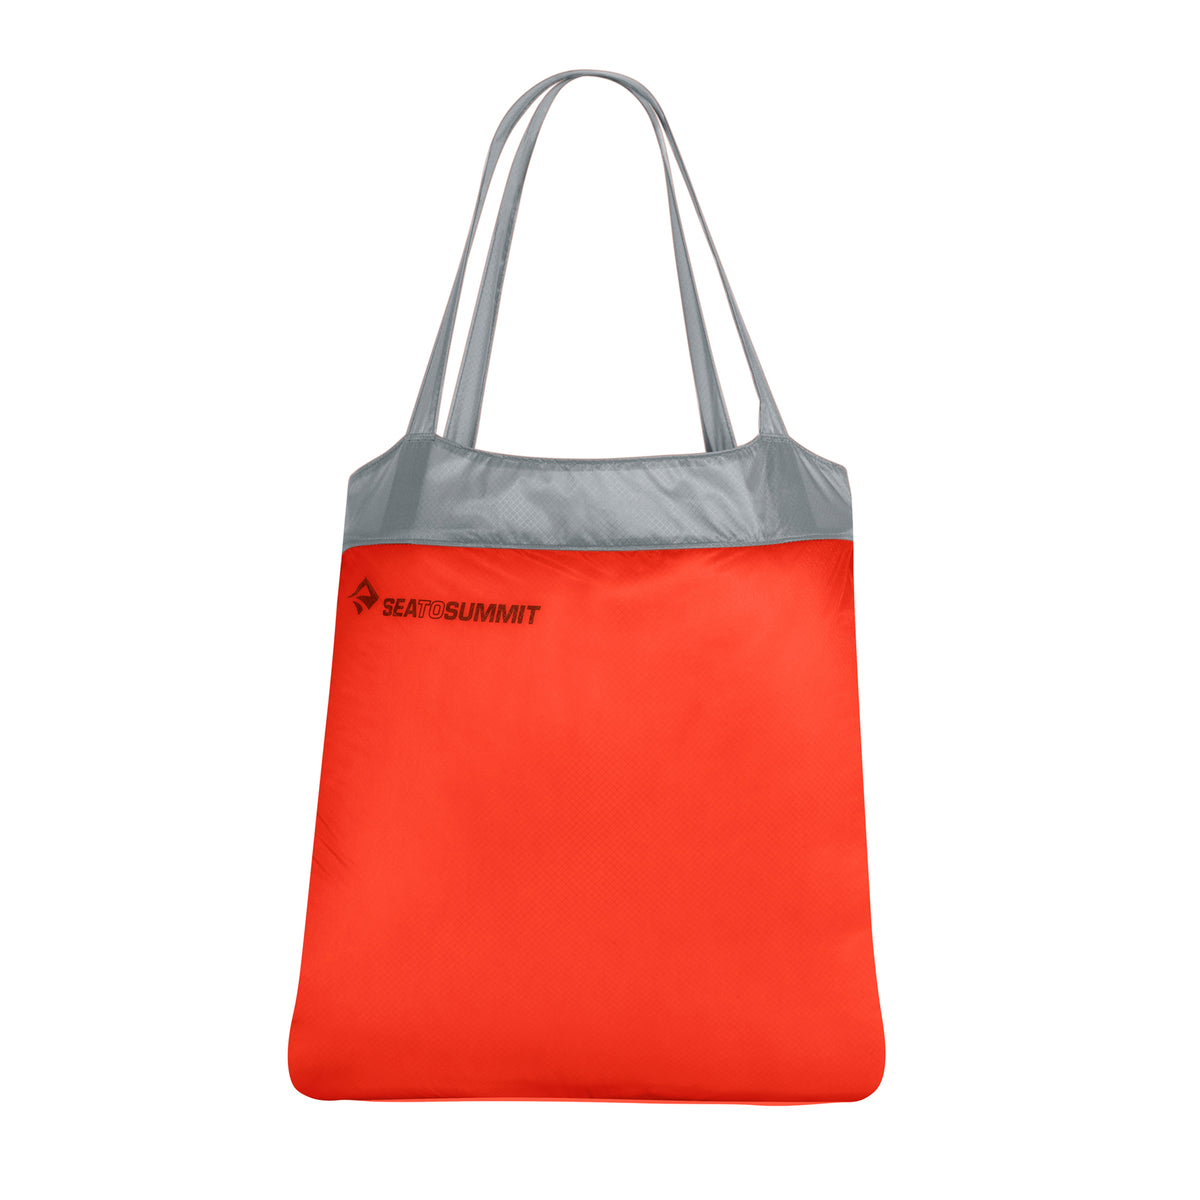 Tip Tuesday: check out how to fold the Large Utility Tote in 4